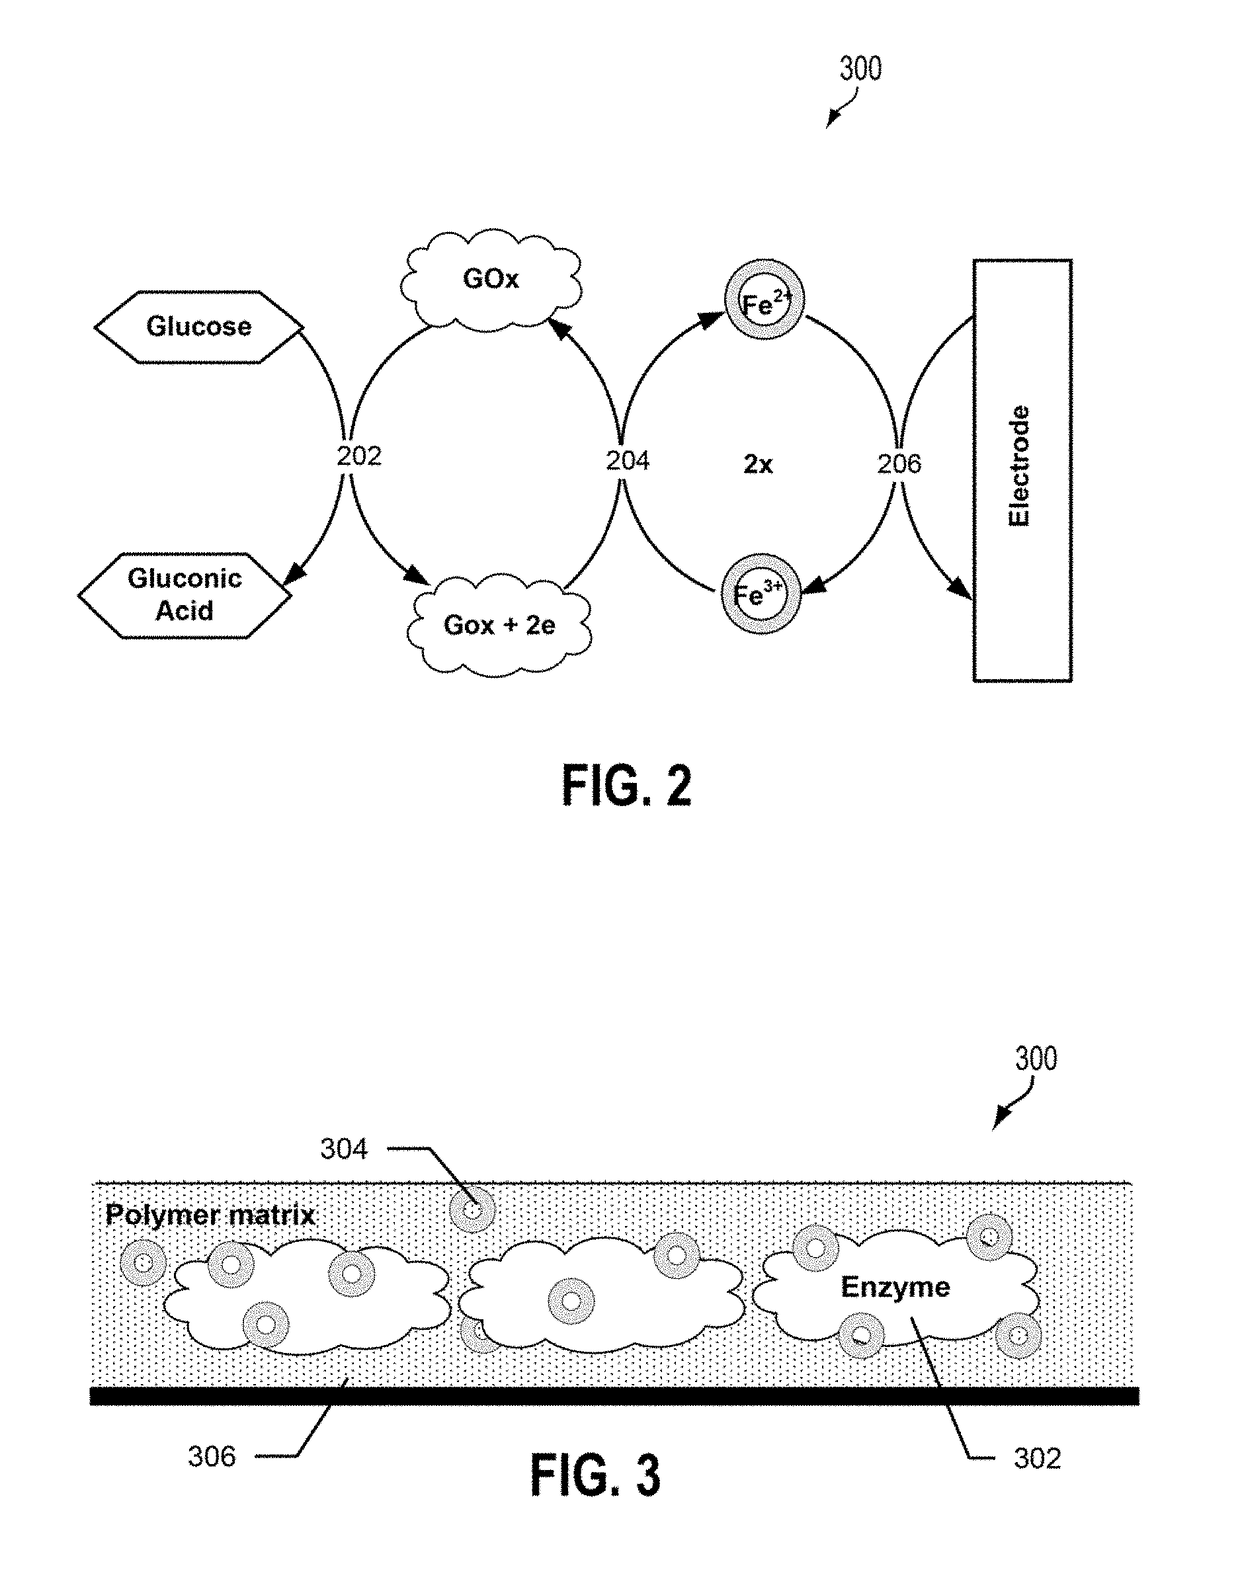 Anti-interferent barrier layers for non-invasive transdermal sampling and analysis device